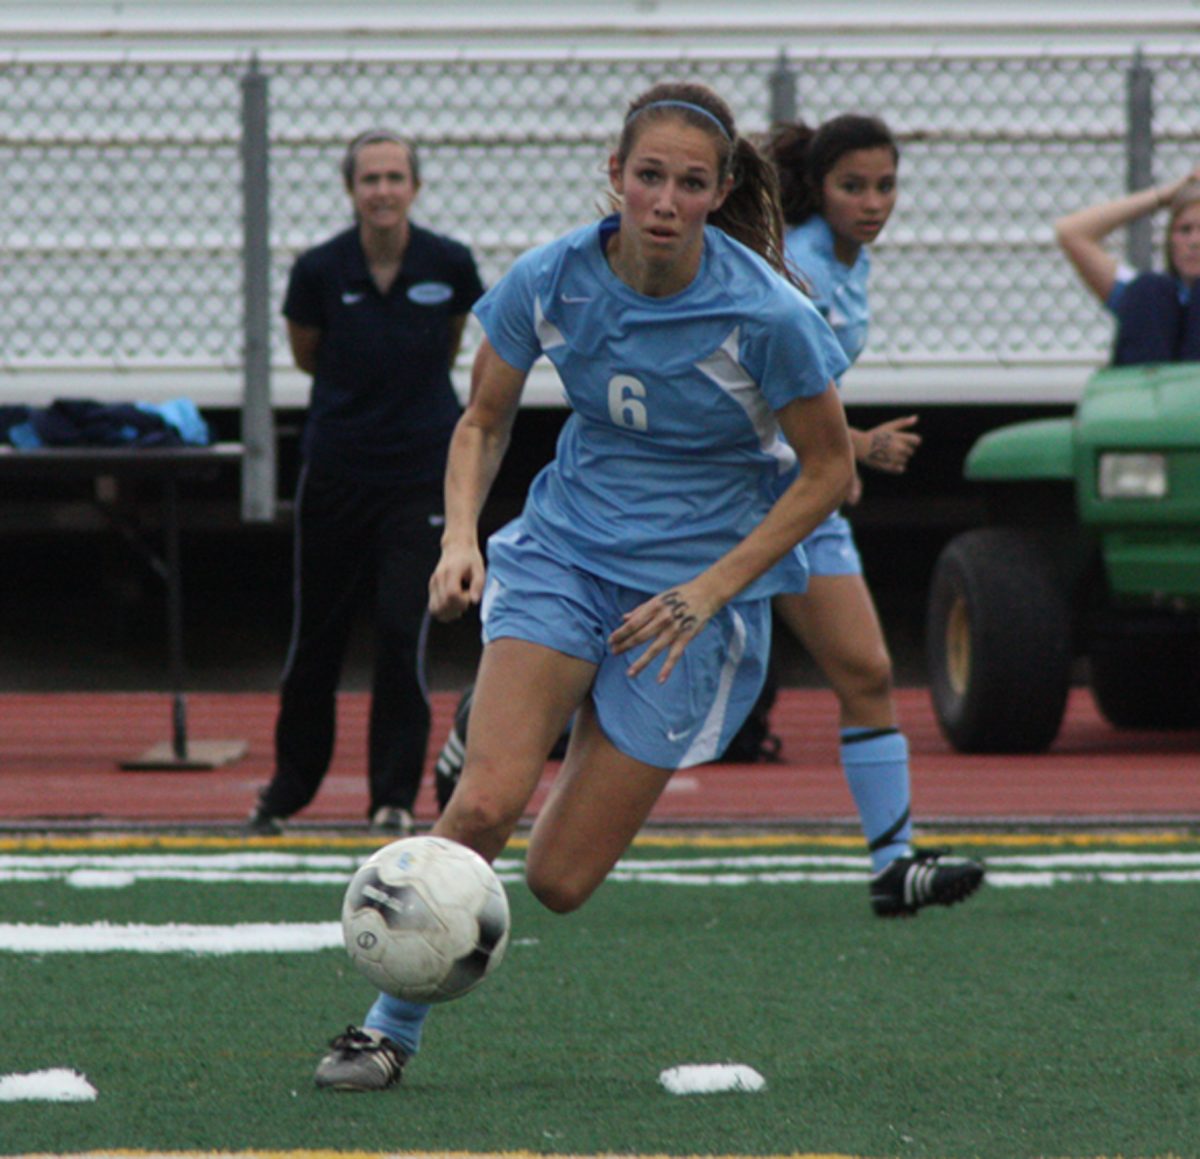 Junior Allie Gerner launches the ball across the field.